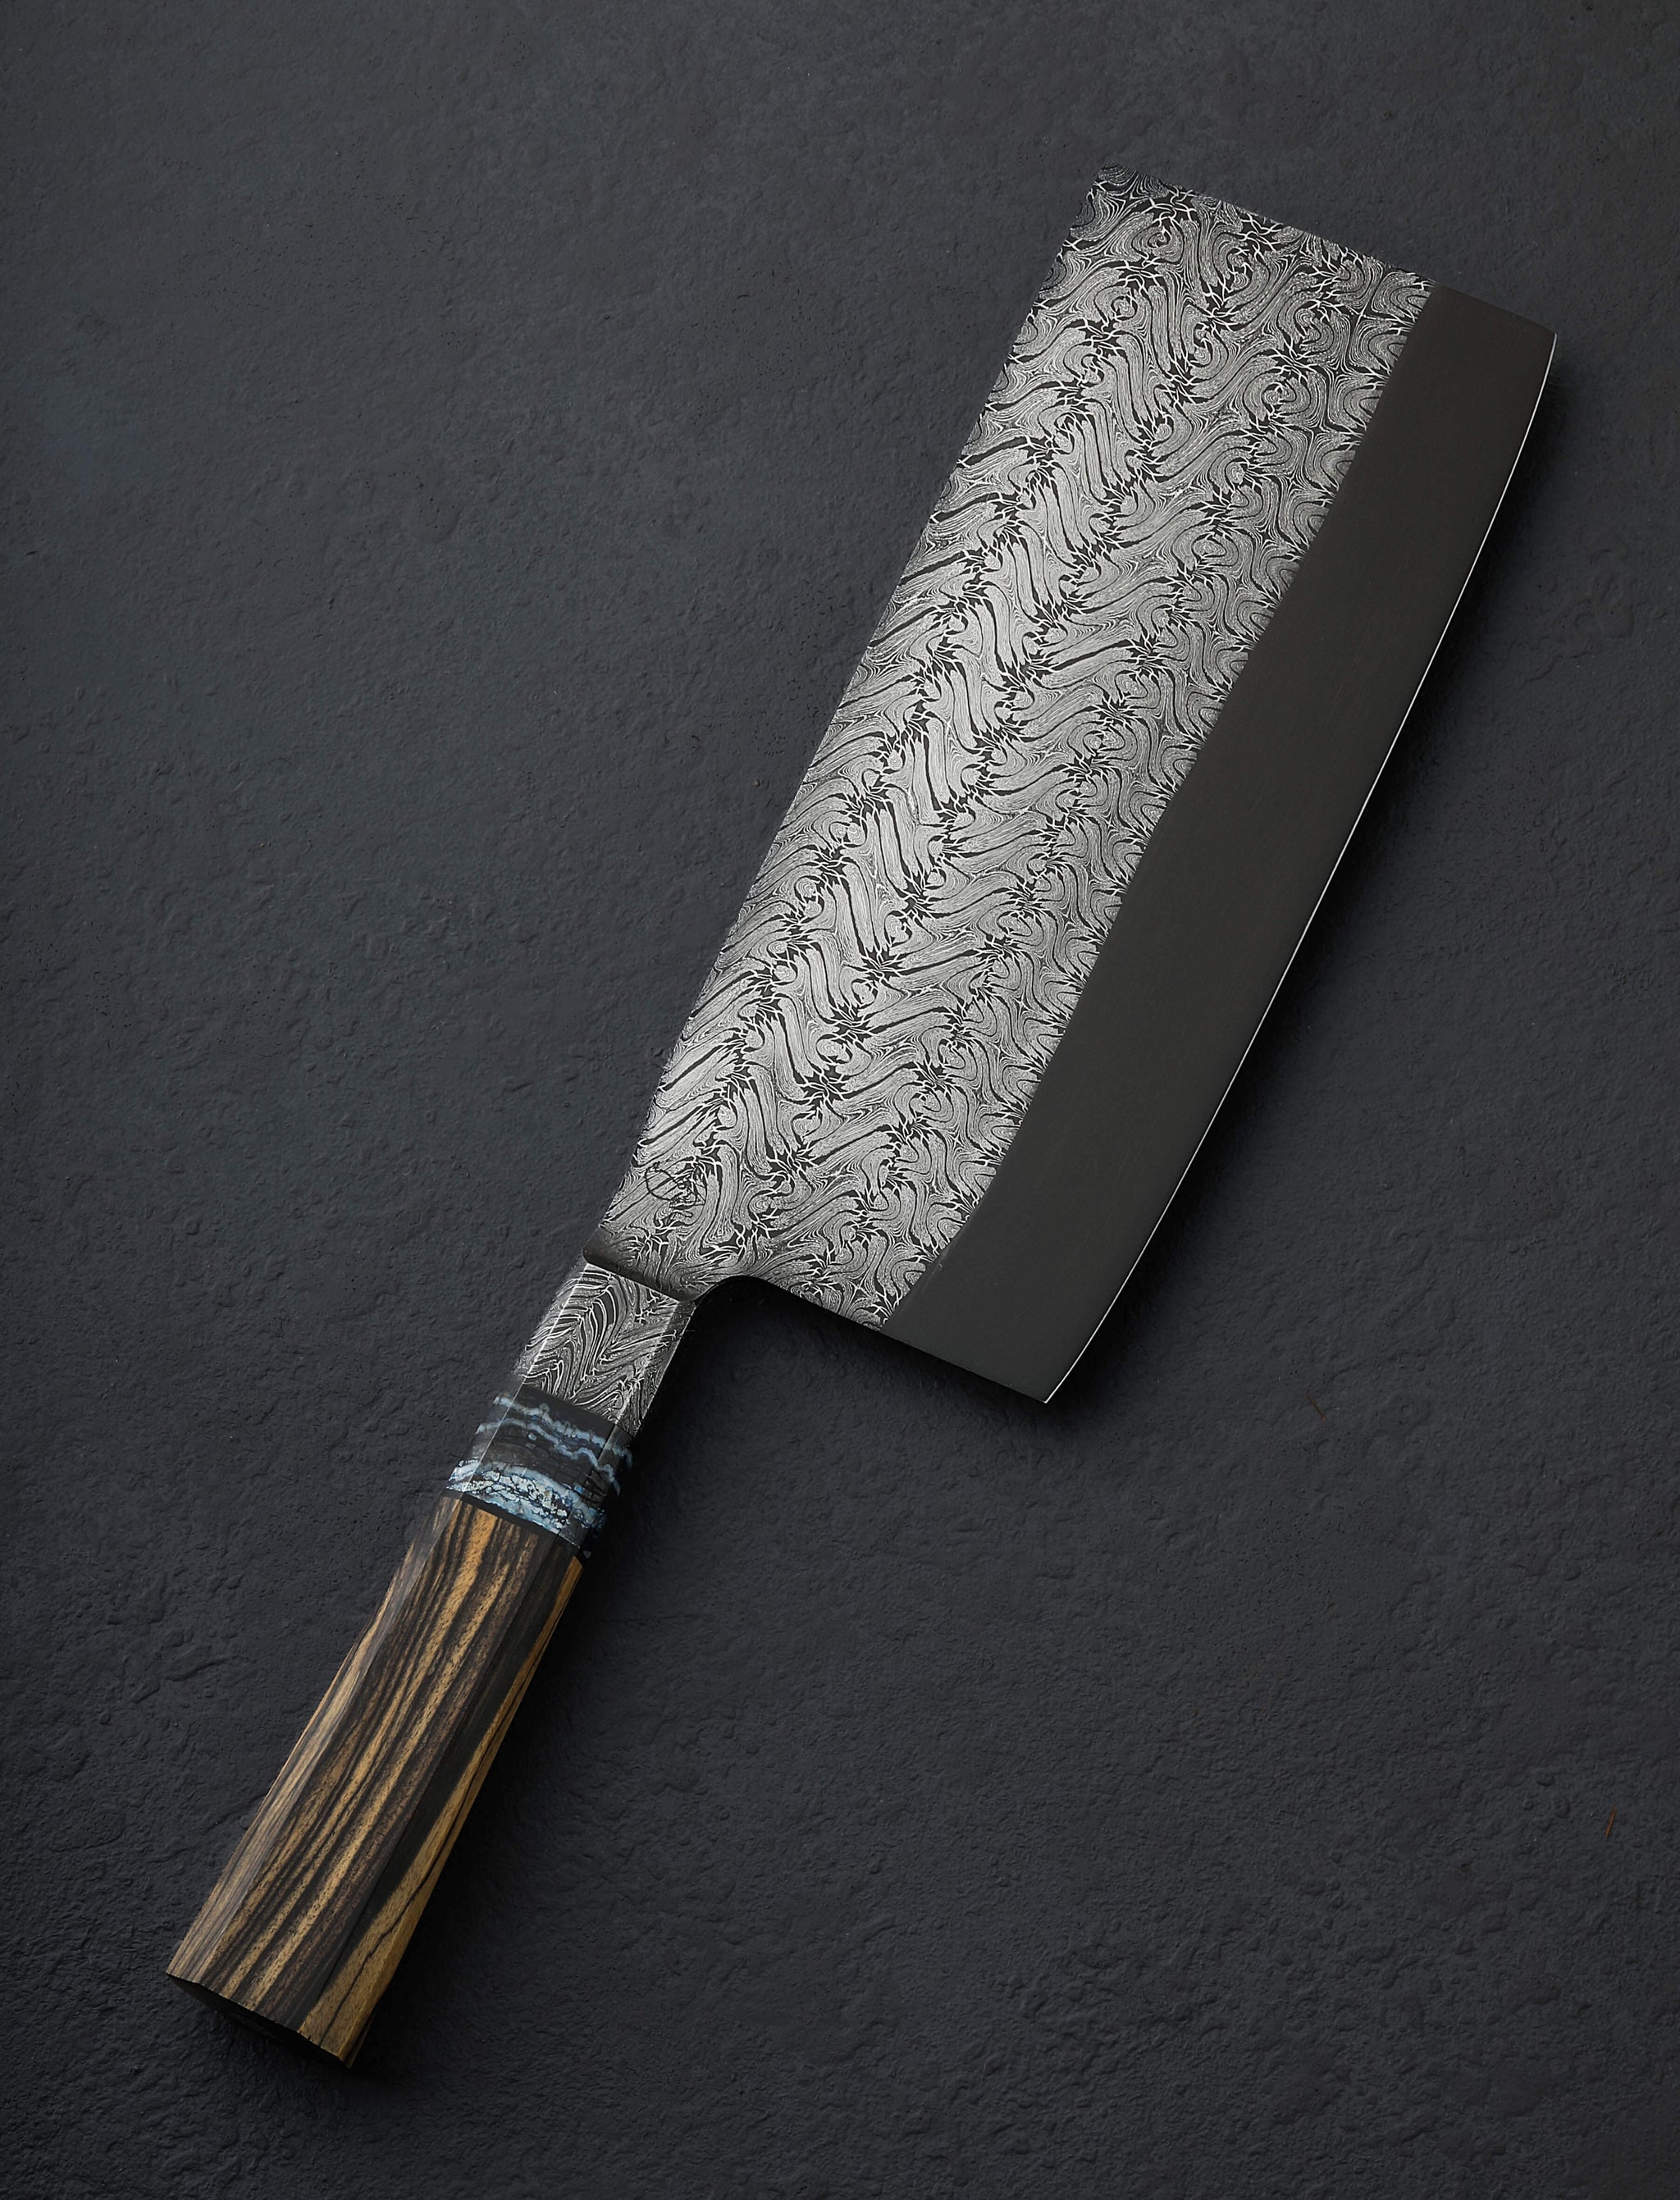 Casey Vilensky - Vancouver Turkish Twist Chinese Cleaver 221mm